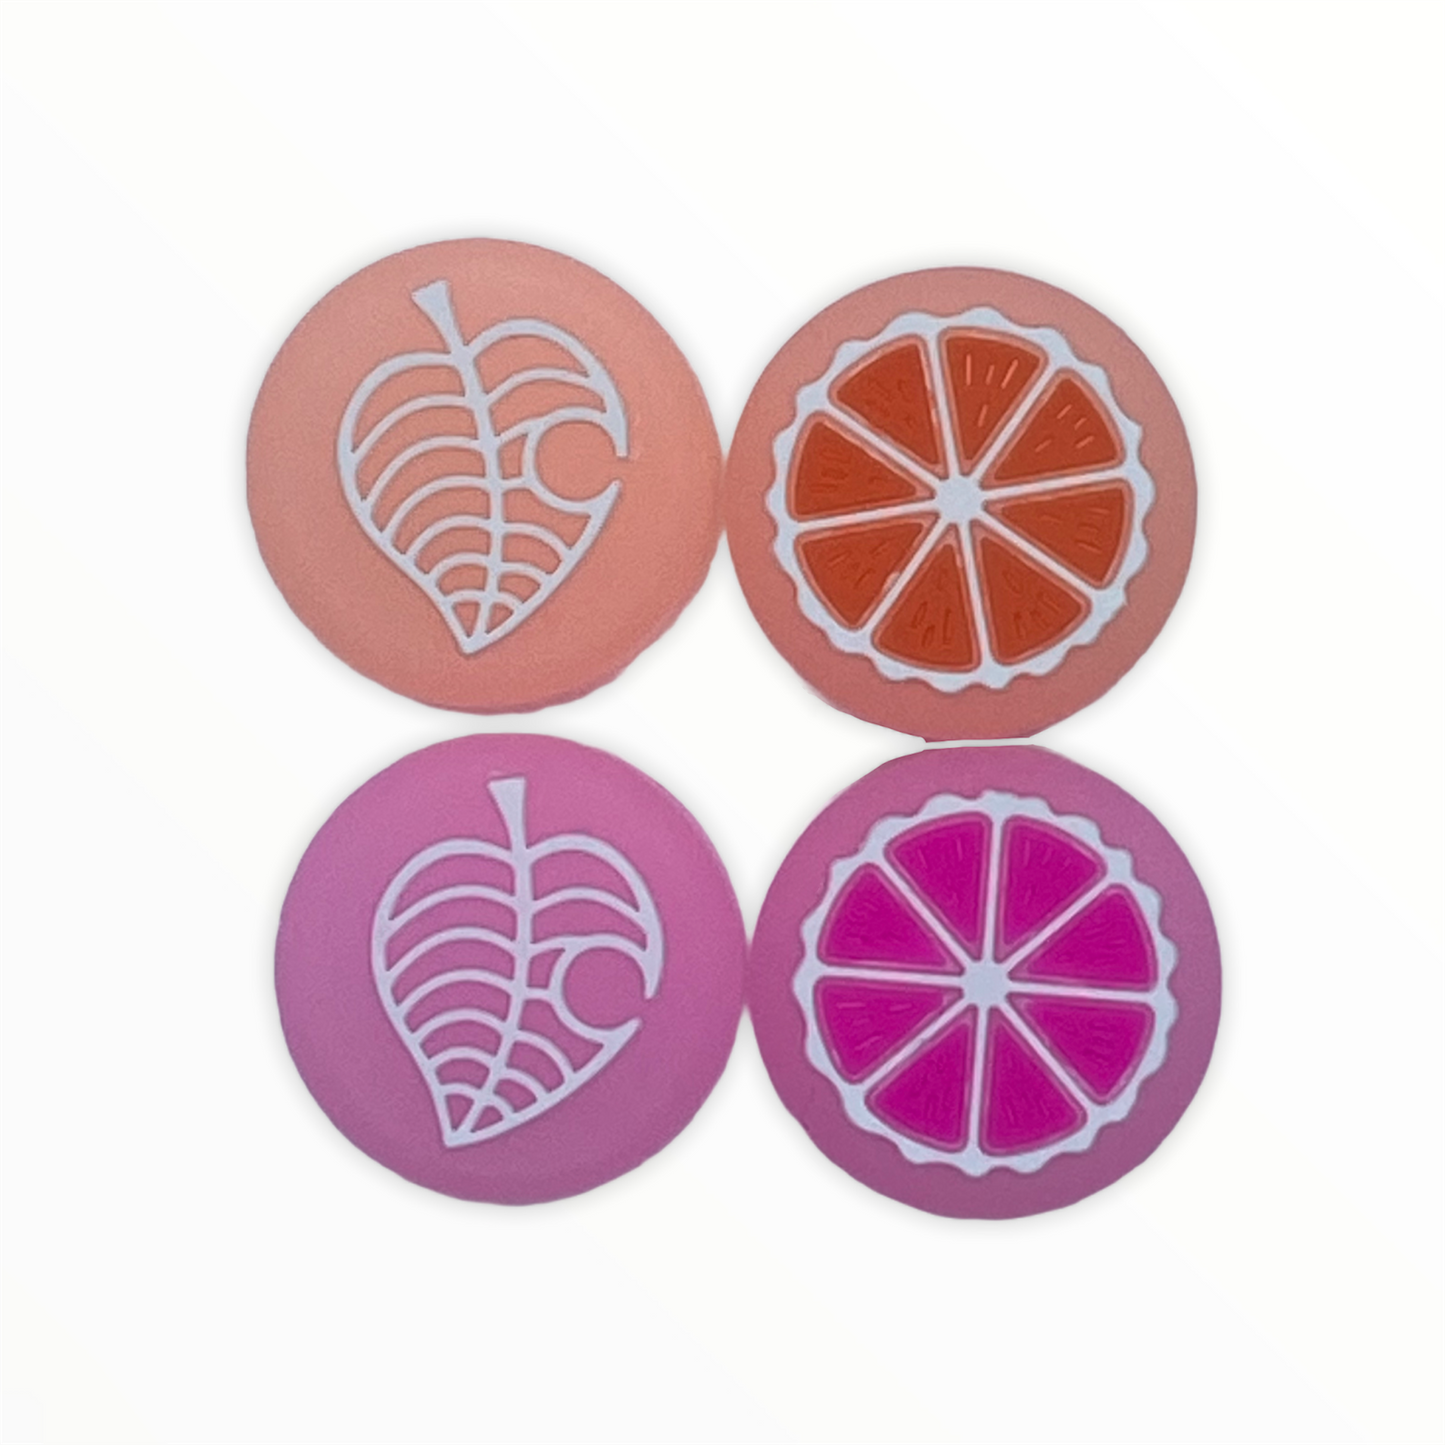 JenDore Jelly Orange & Pink 4Pcs Leaf Fruit Silicone Thumb Grip Caps for Nintendo Switch